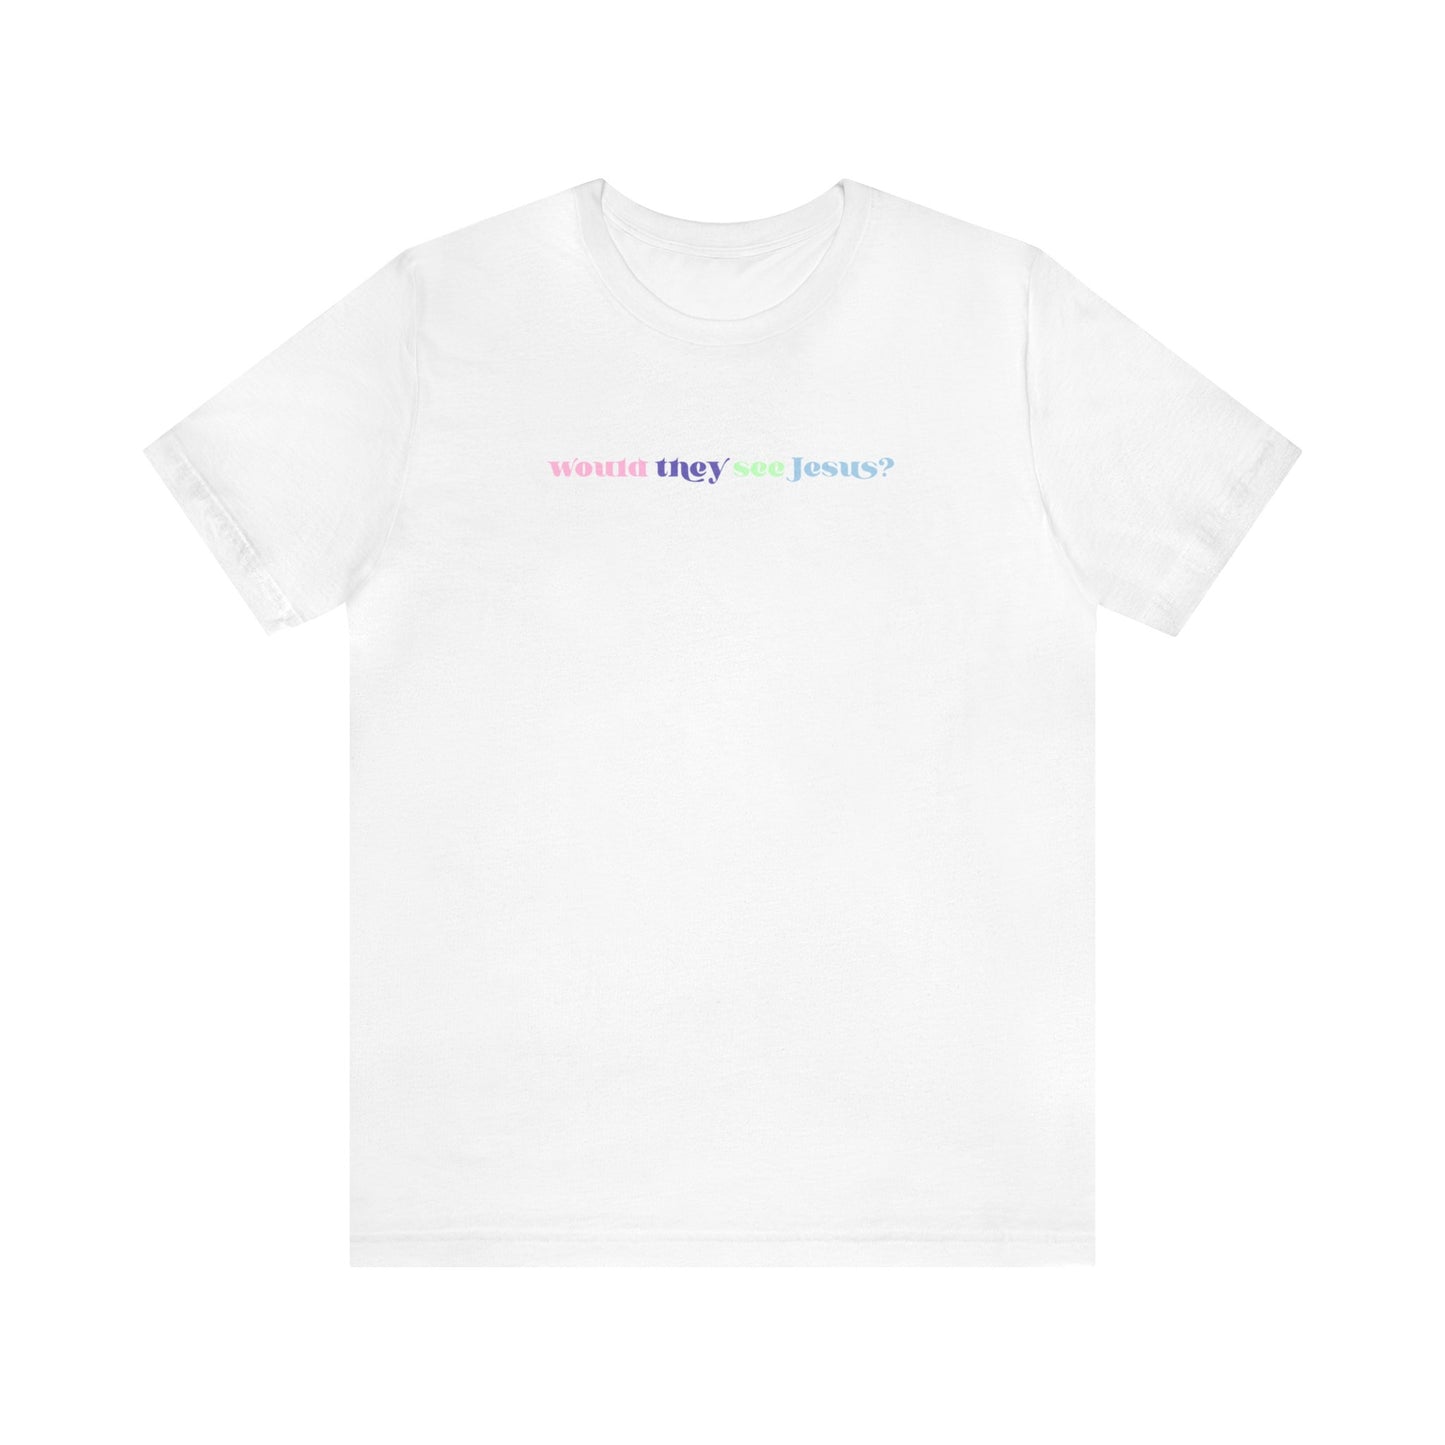 Ariel Thompson: Would They See Jesus? Tee